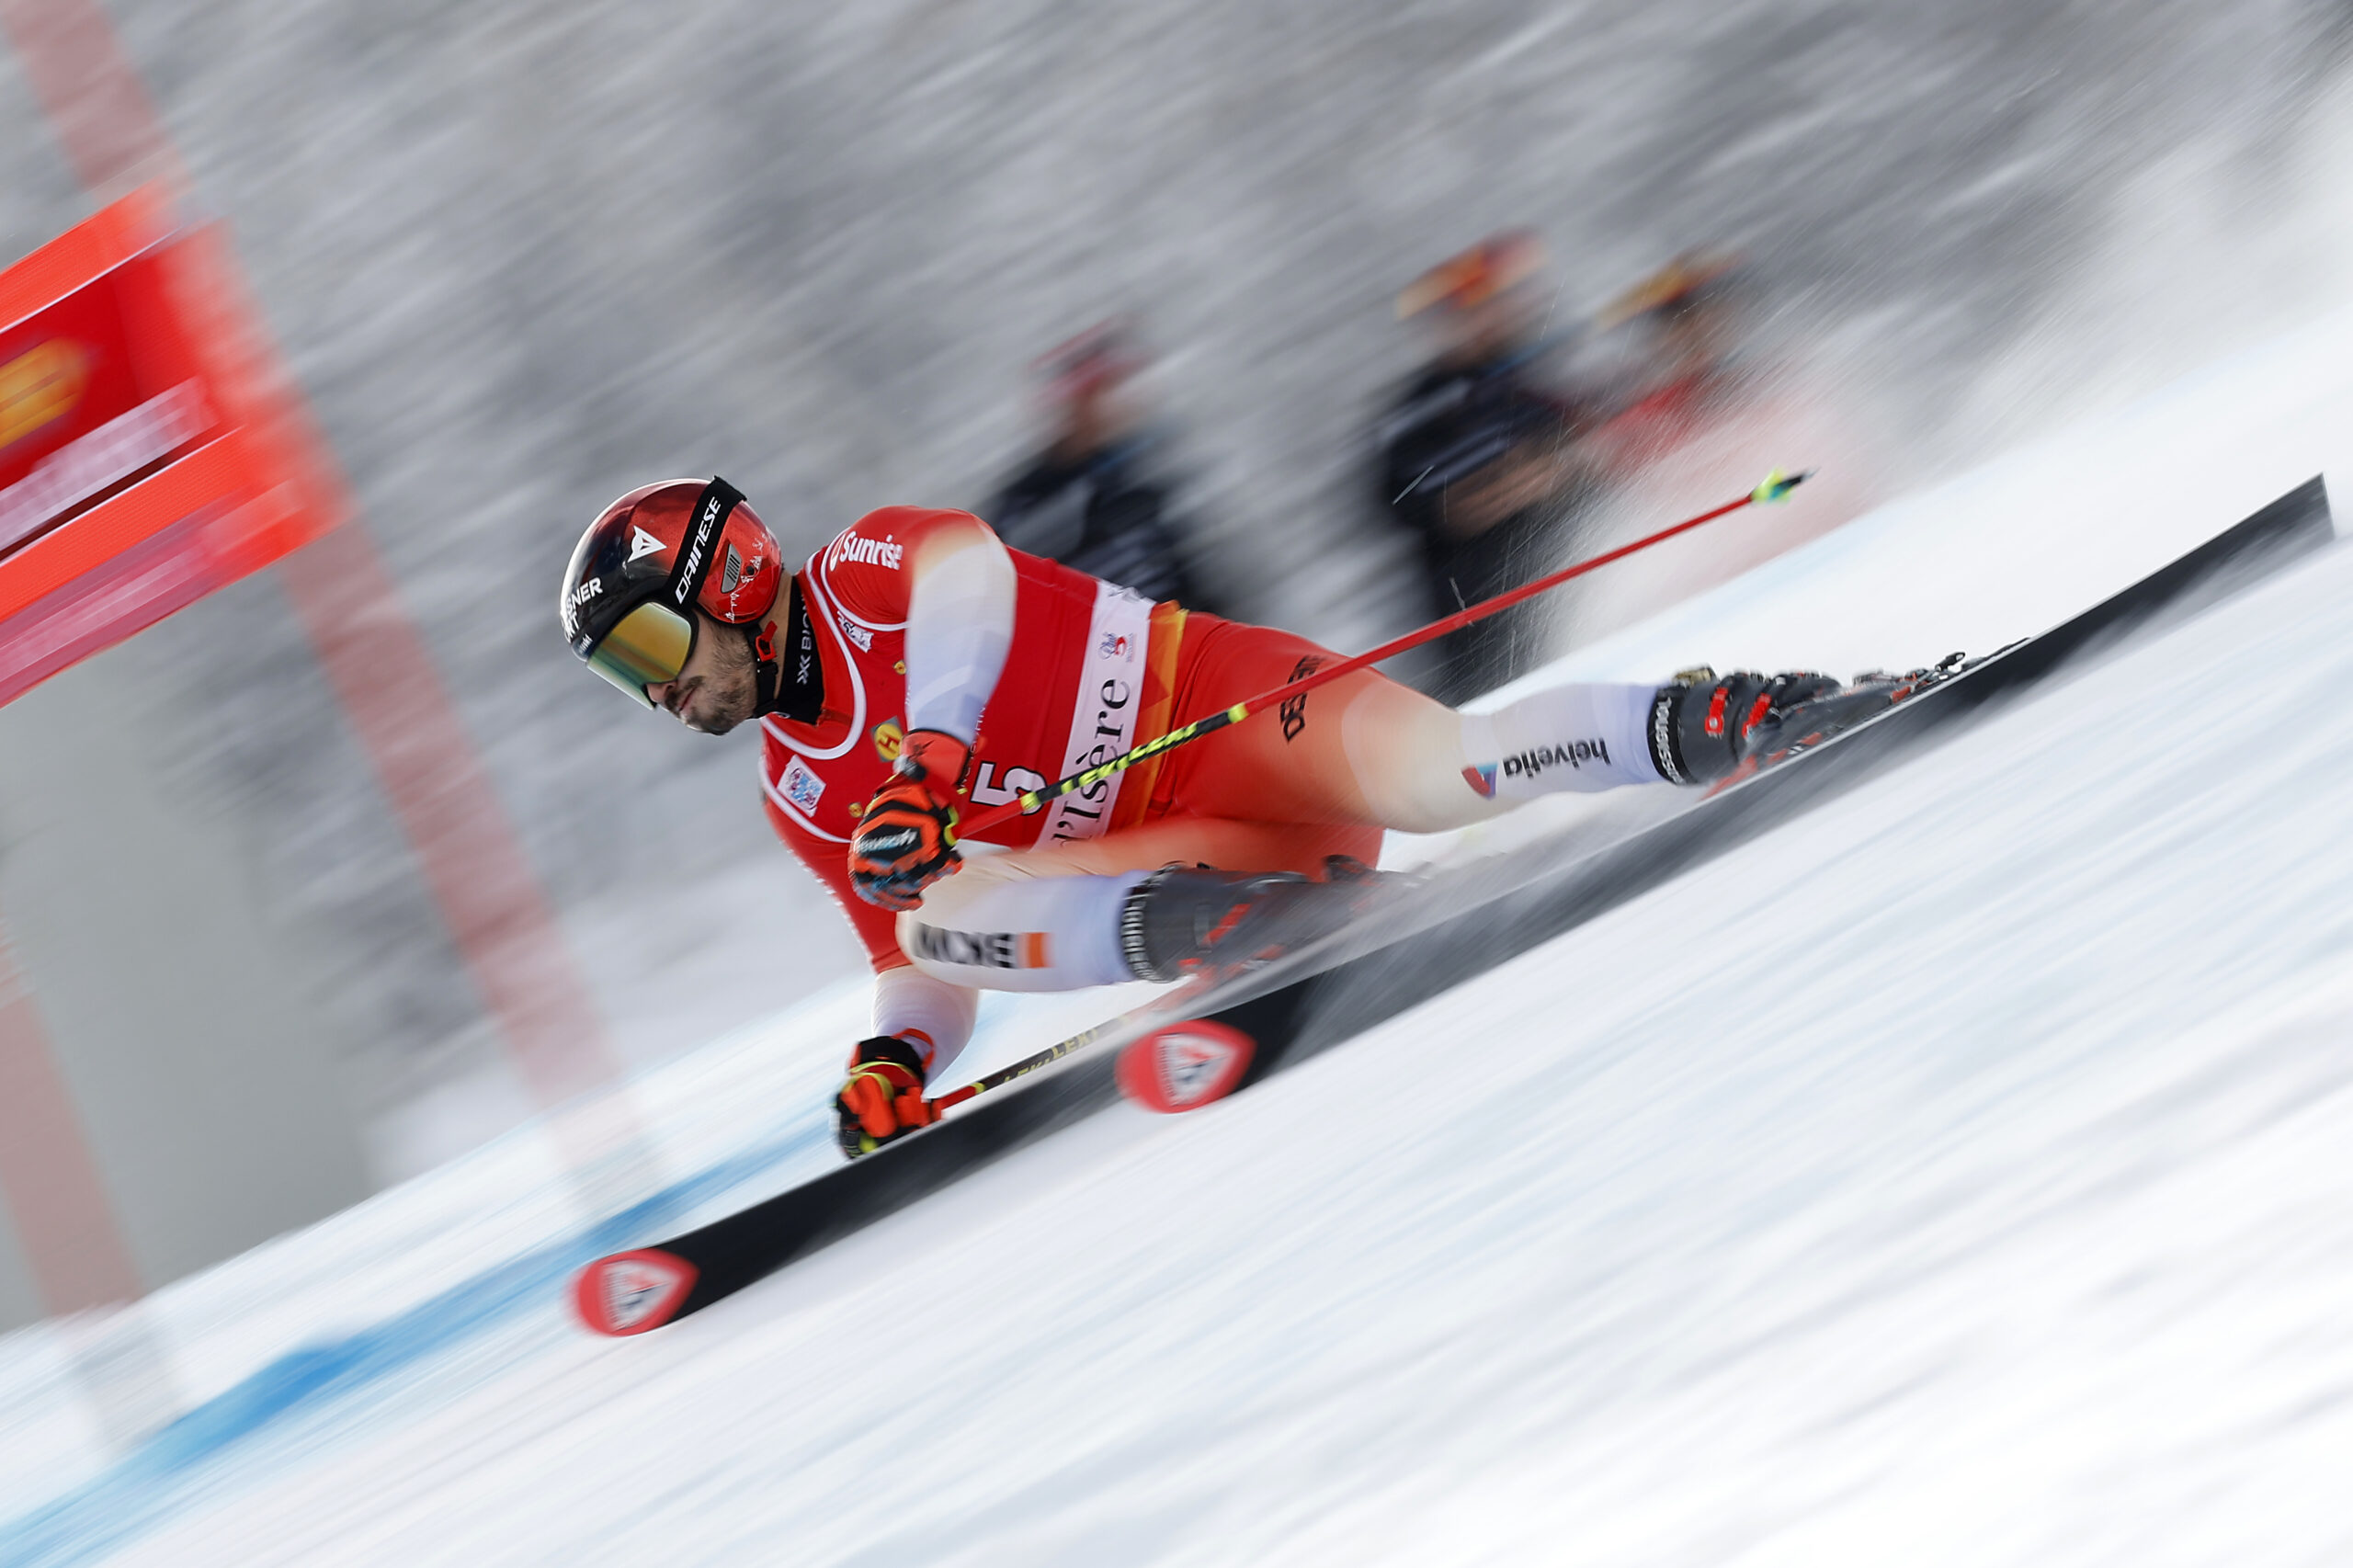 VAL D'ISERE, FRANCE - DECEMBER 10: Loic Meillard of Team Switzerland in action during the Audi FIS Alpine Ski World Cup Men's Giant Slalom on December 10, 2022 in Val d'Isere, France. (Photo by Alexis Boichard/Agence Zoom)